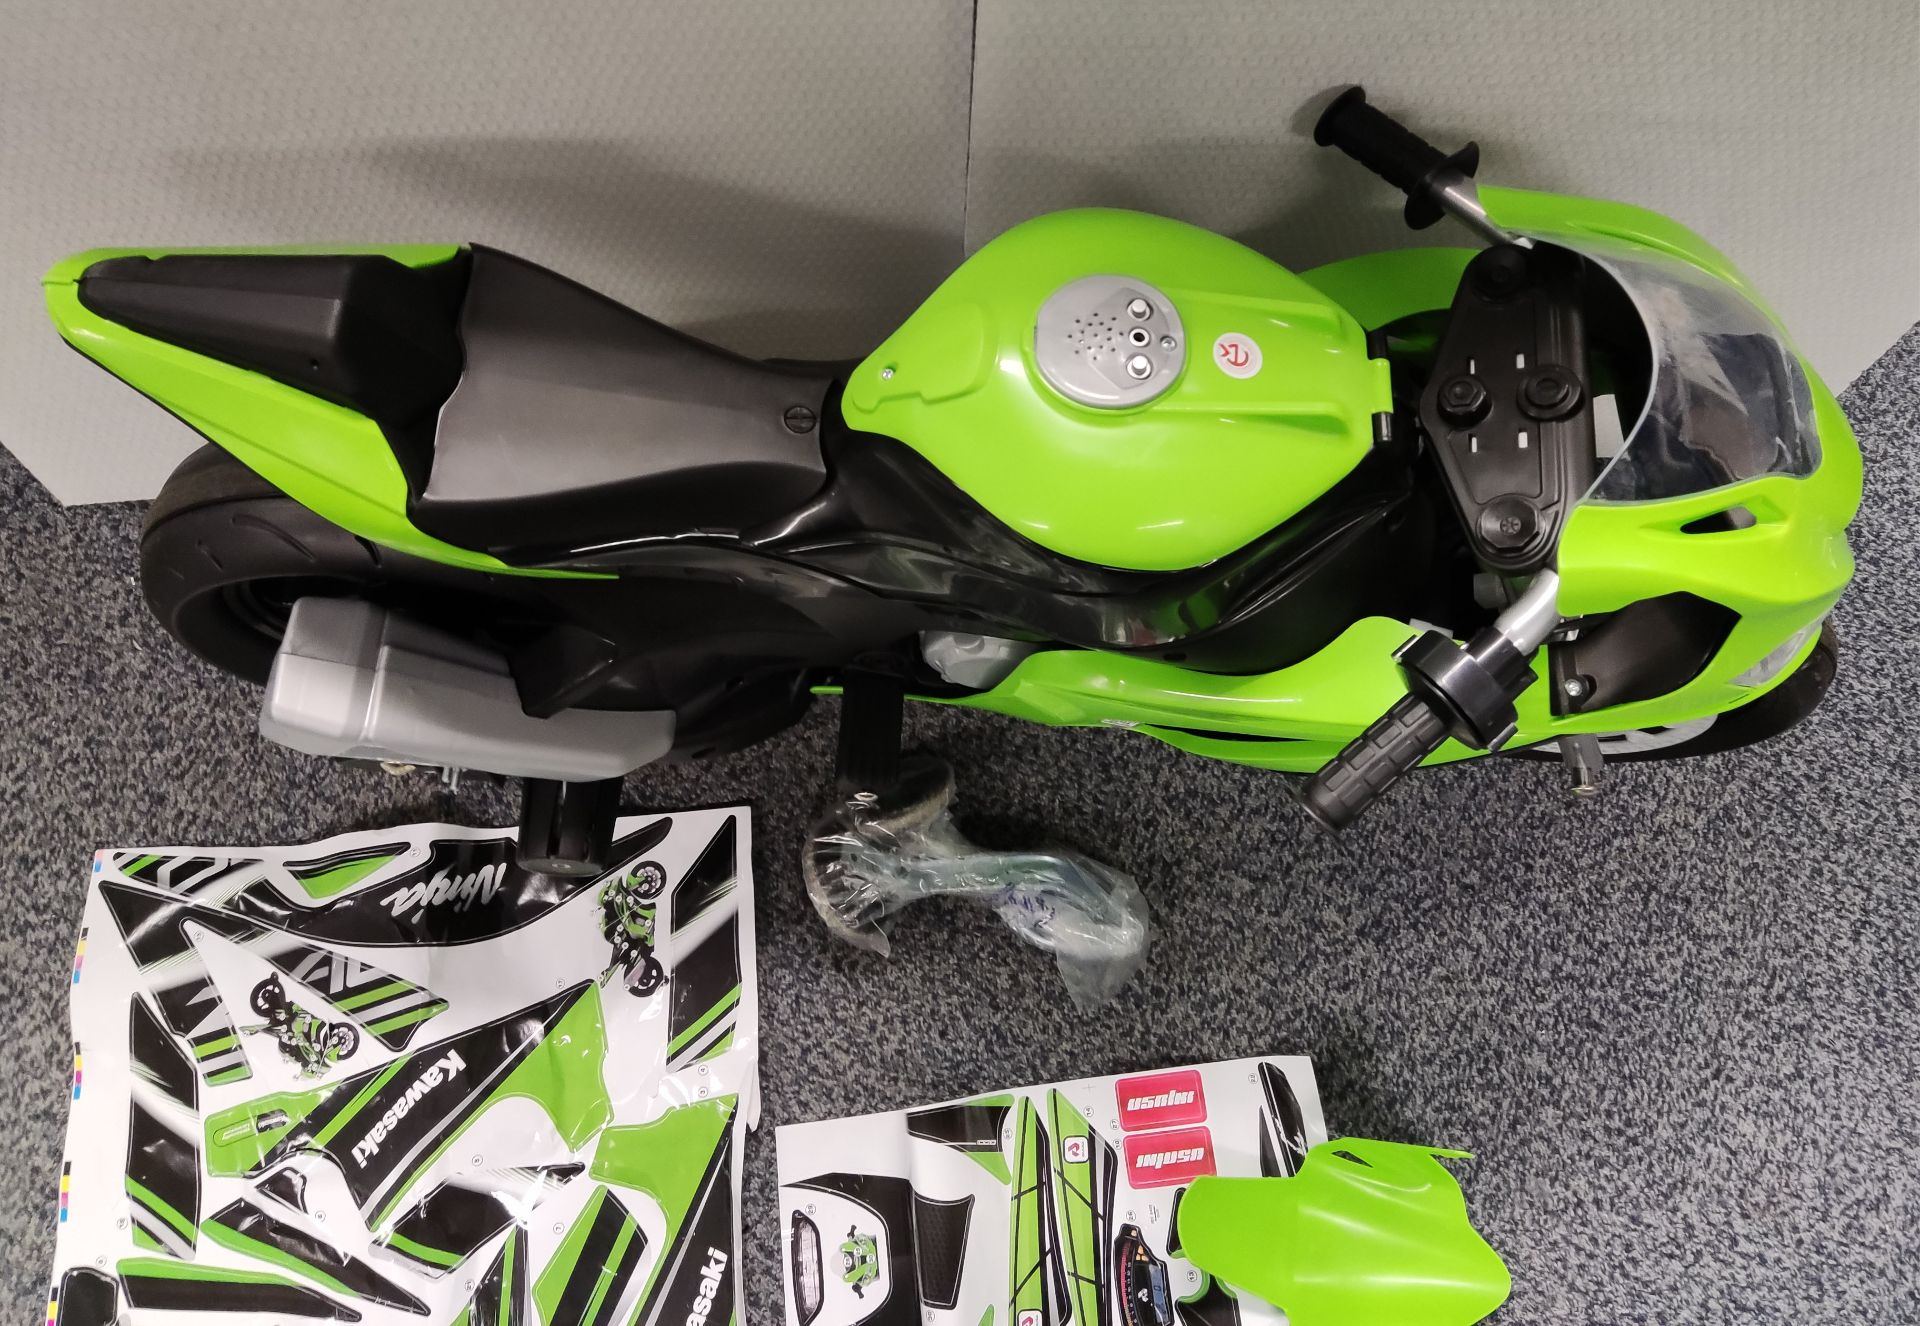 1 x Injusa Kids Electric Ride On Kawasaki ZX10 12V Motorcycle - 6495 - HTYS174 - CL987 - Location: - Image 17 of 24